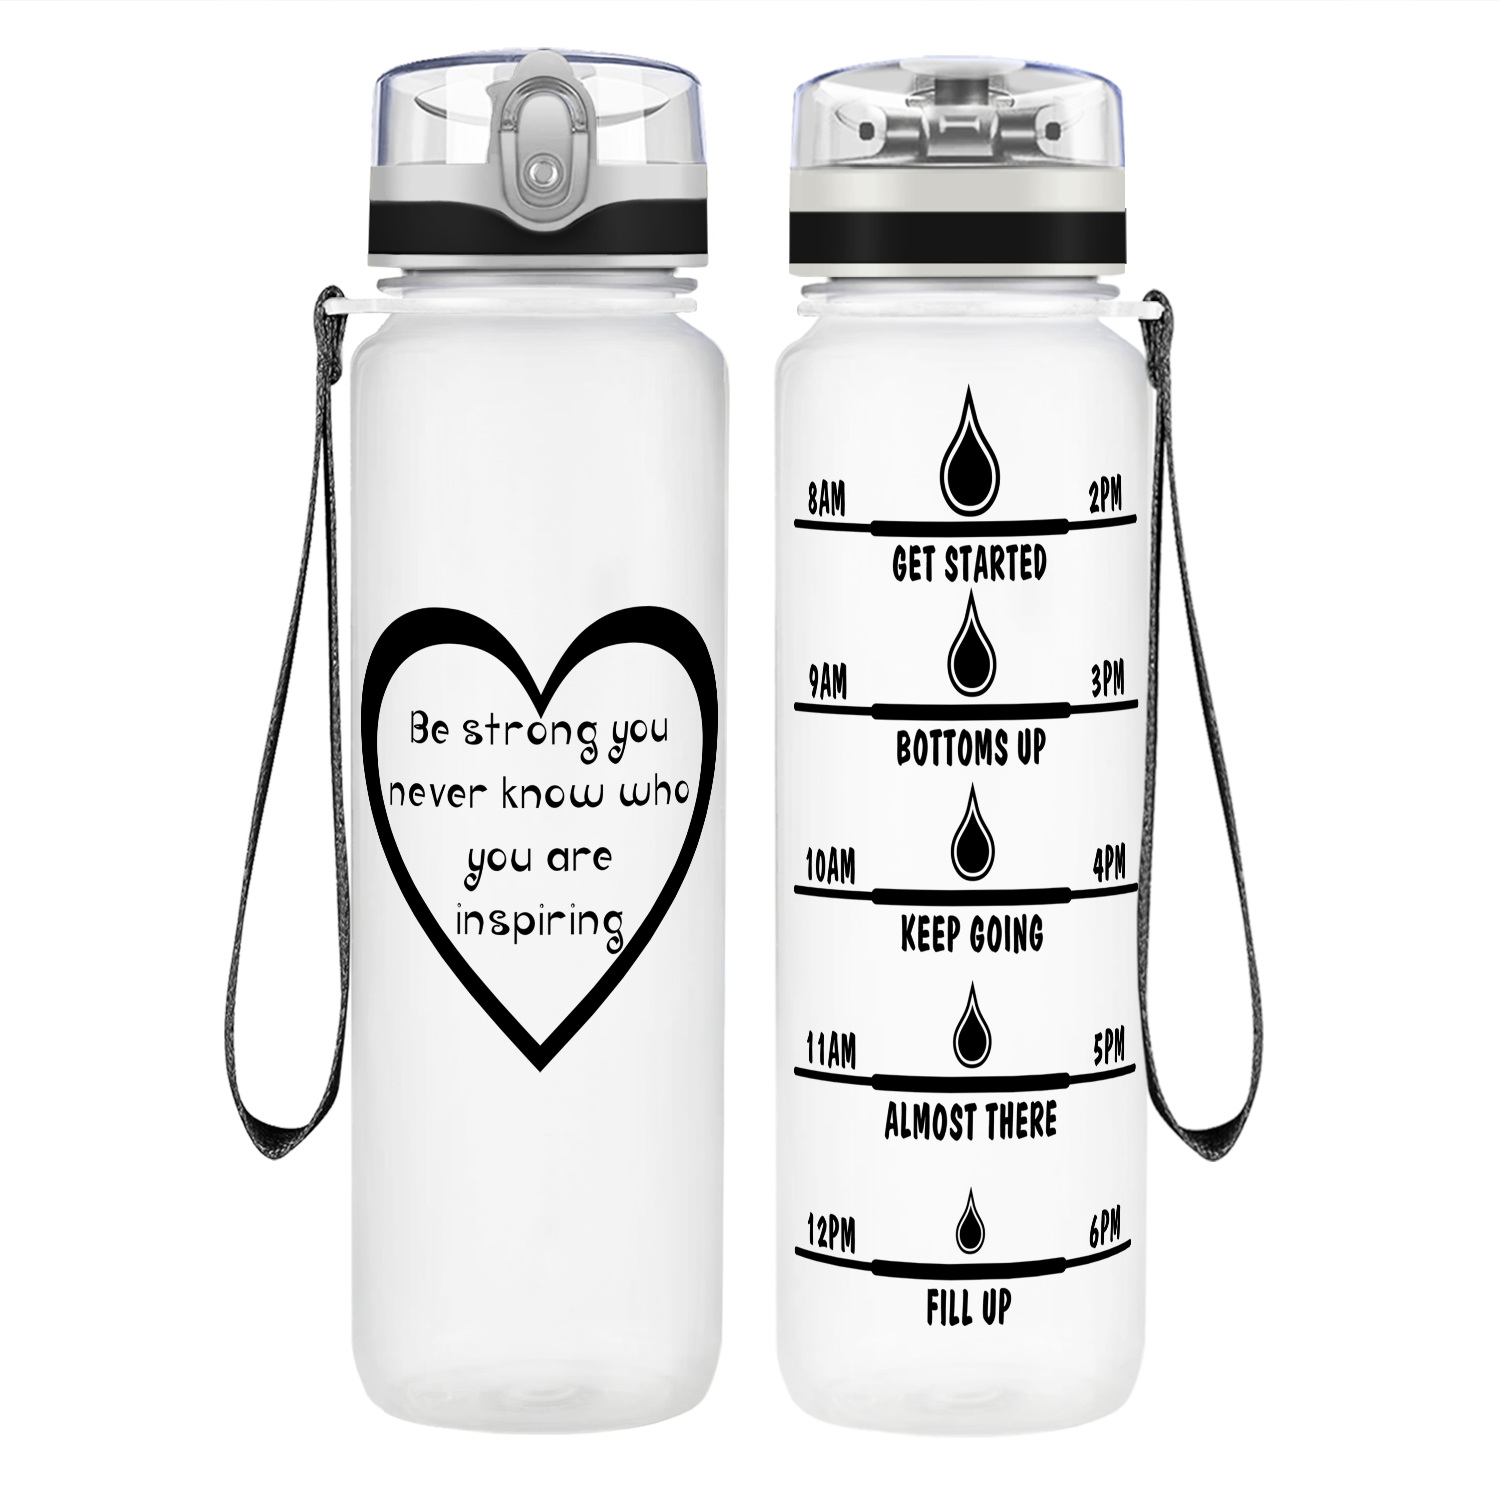 22oz Clear Water Tracker Workout Tumblr Water Bottle Gift Black Friday  Deals